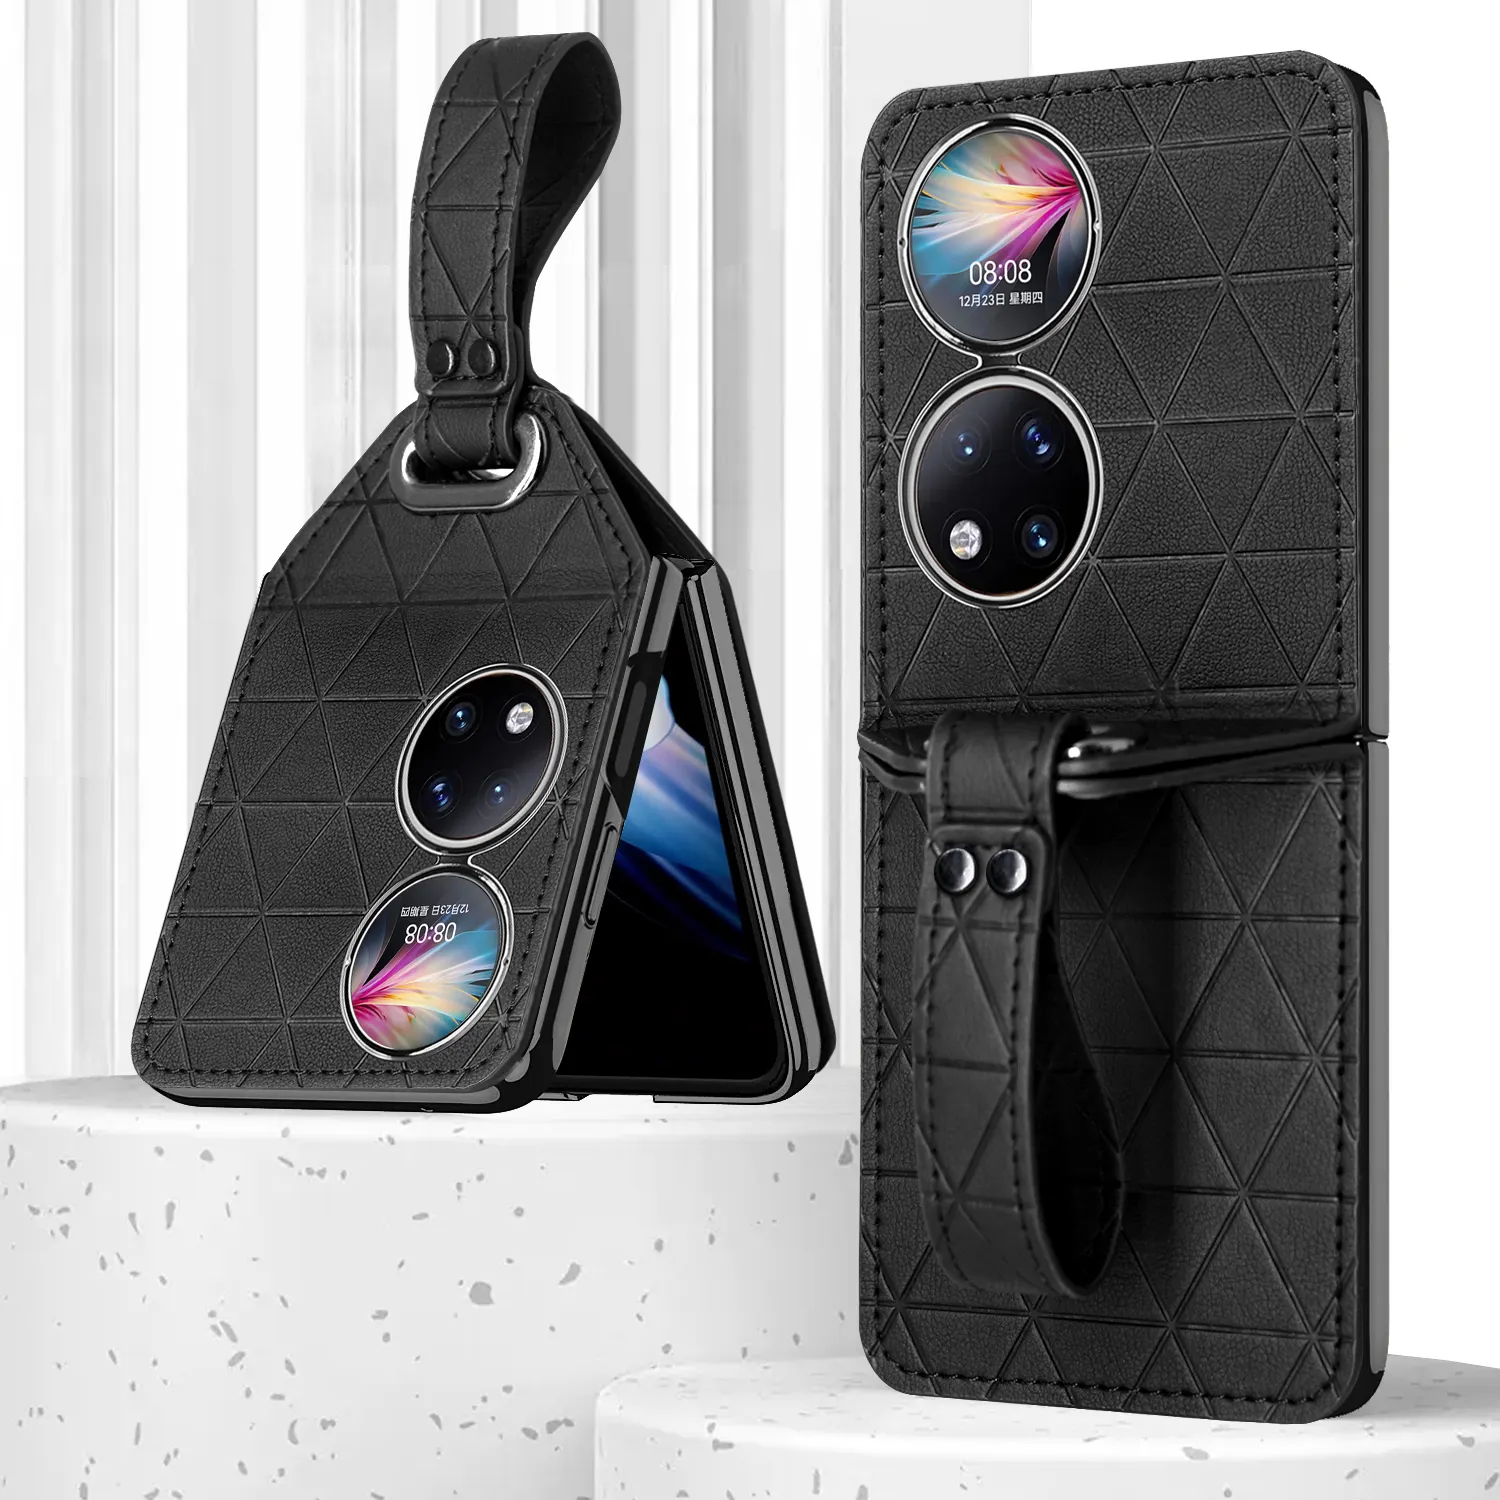 VIETAO Luxury Design folding leather phone cases for huawei p50 pocket shockproof cell phone case cover with hand strap